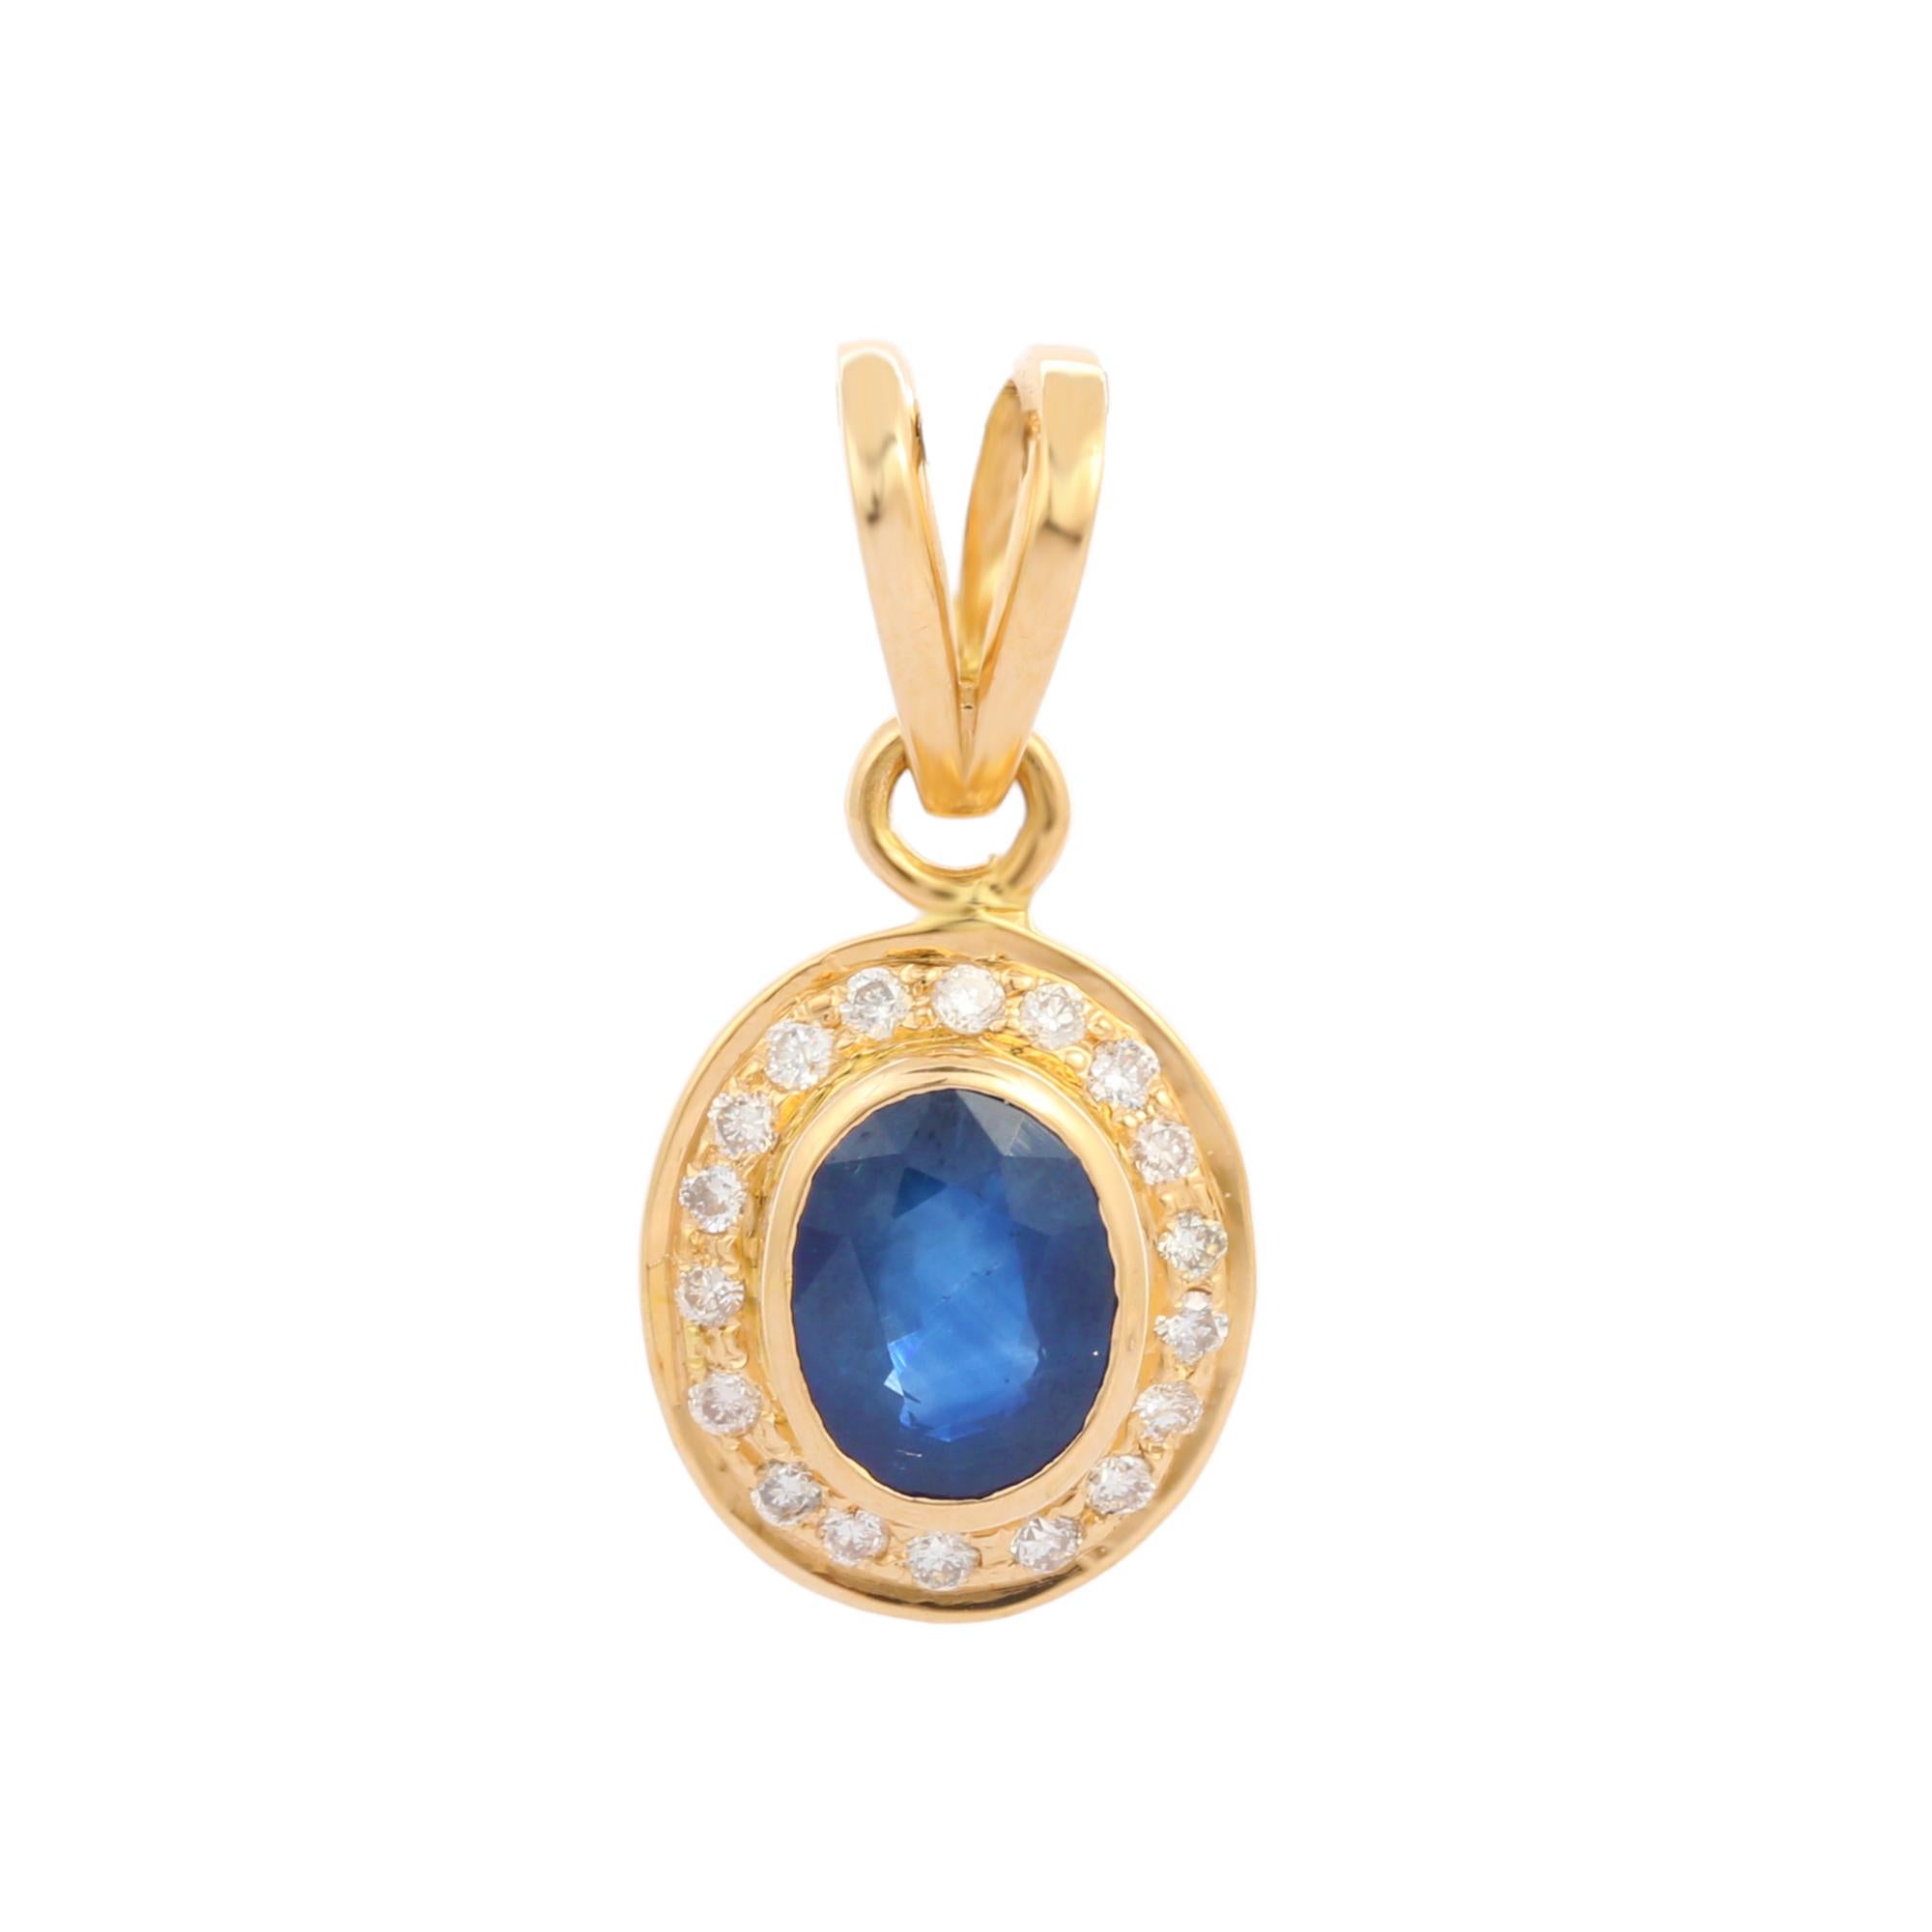 Natural Blue Sapphire pendant in 18K Gold. It has a oval cut sapphire studded with diamonds that completes your look with a decent touch. Pendants are used to wear or gifted to represent love and promises. It's an attractive jewelry piece that goes